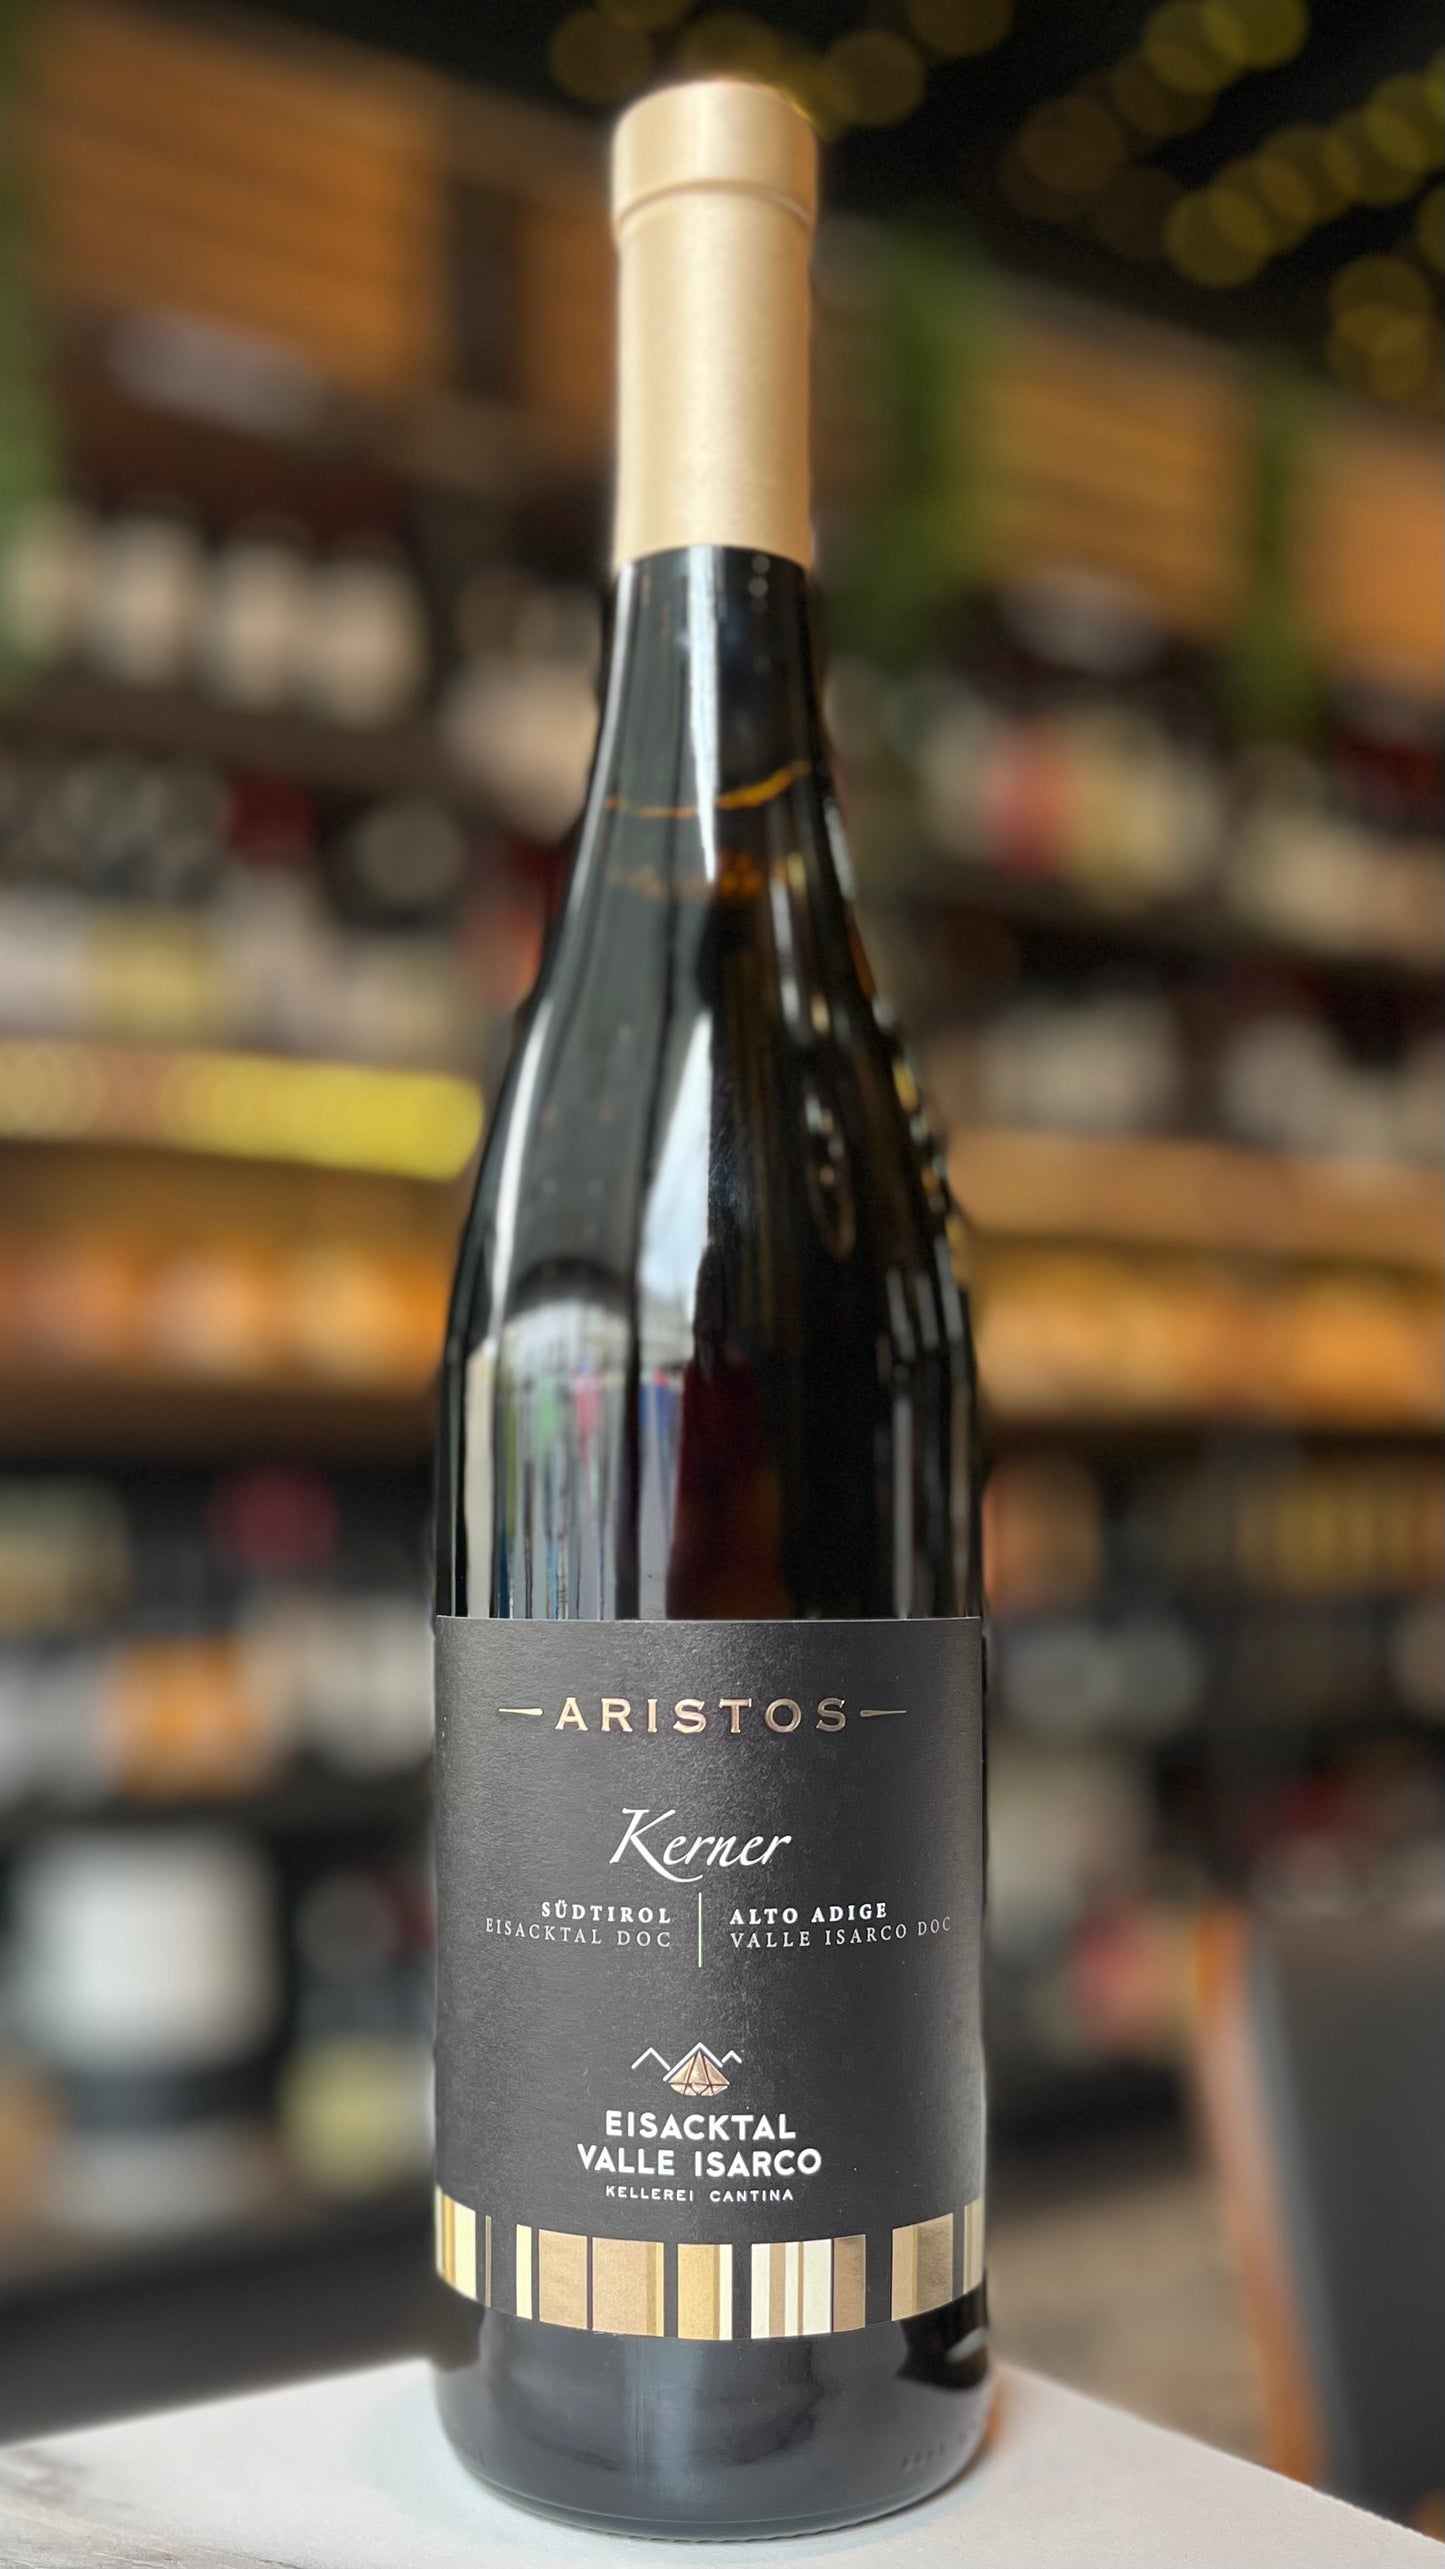 Kerner, Cantina Valle Isarco